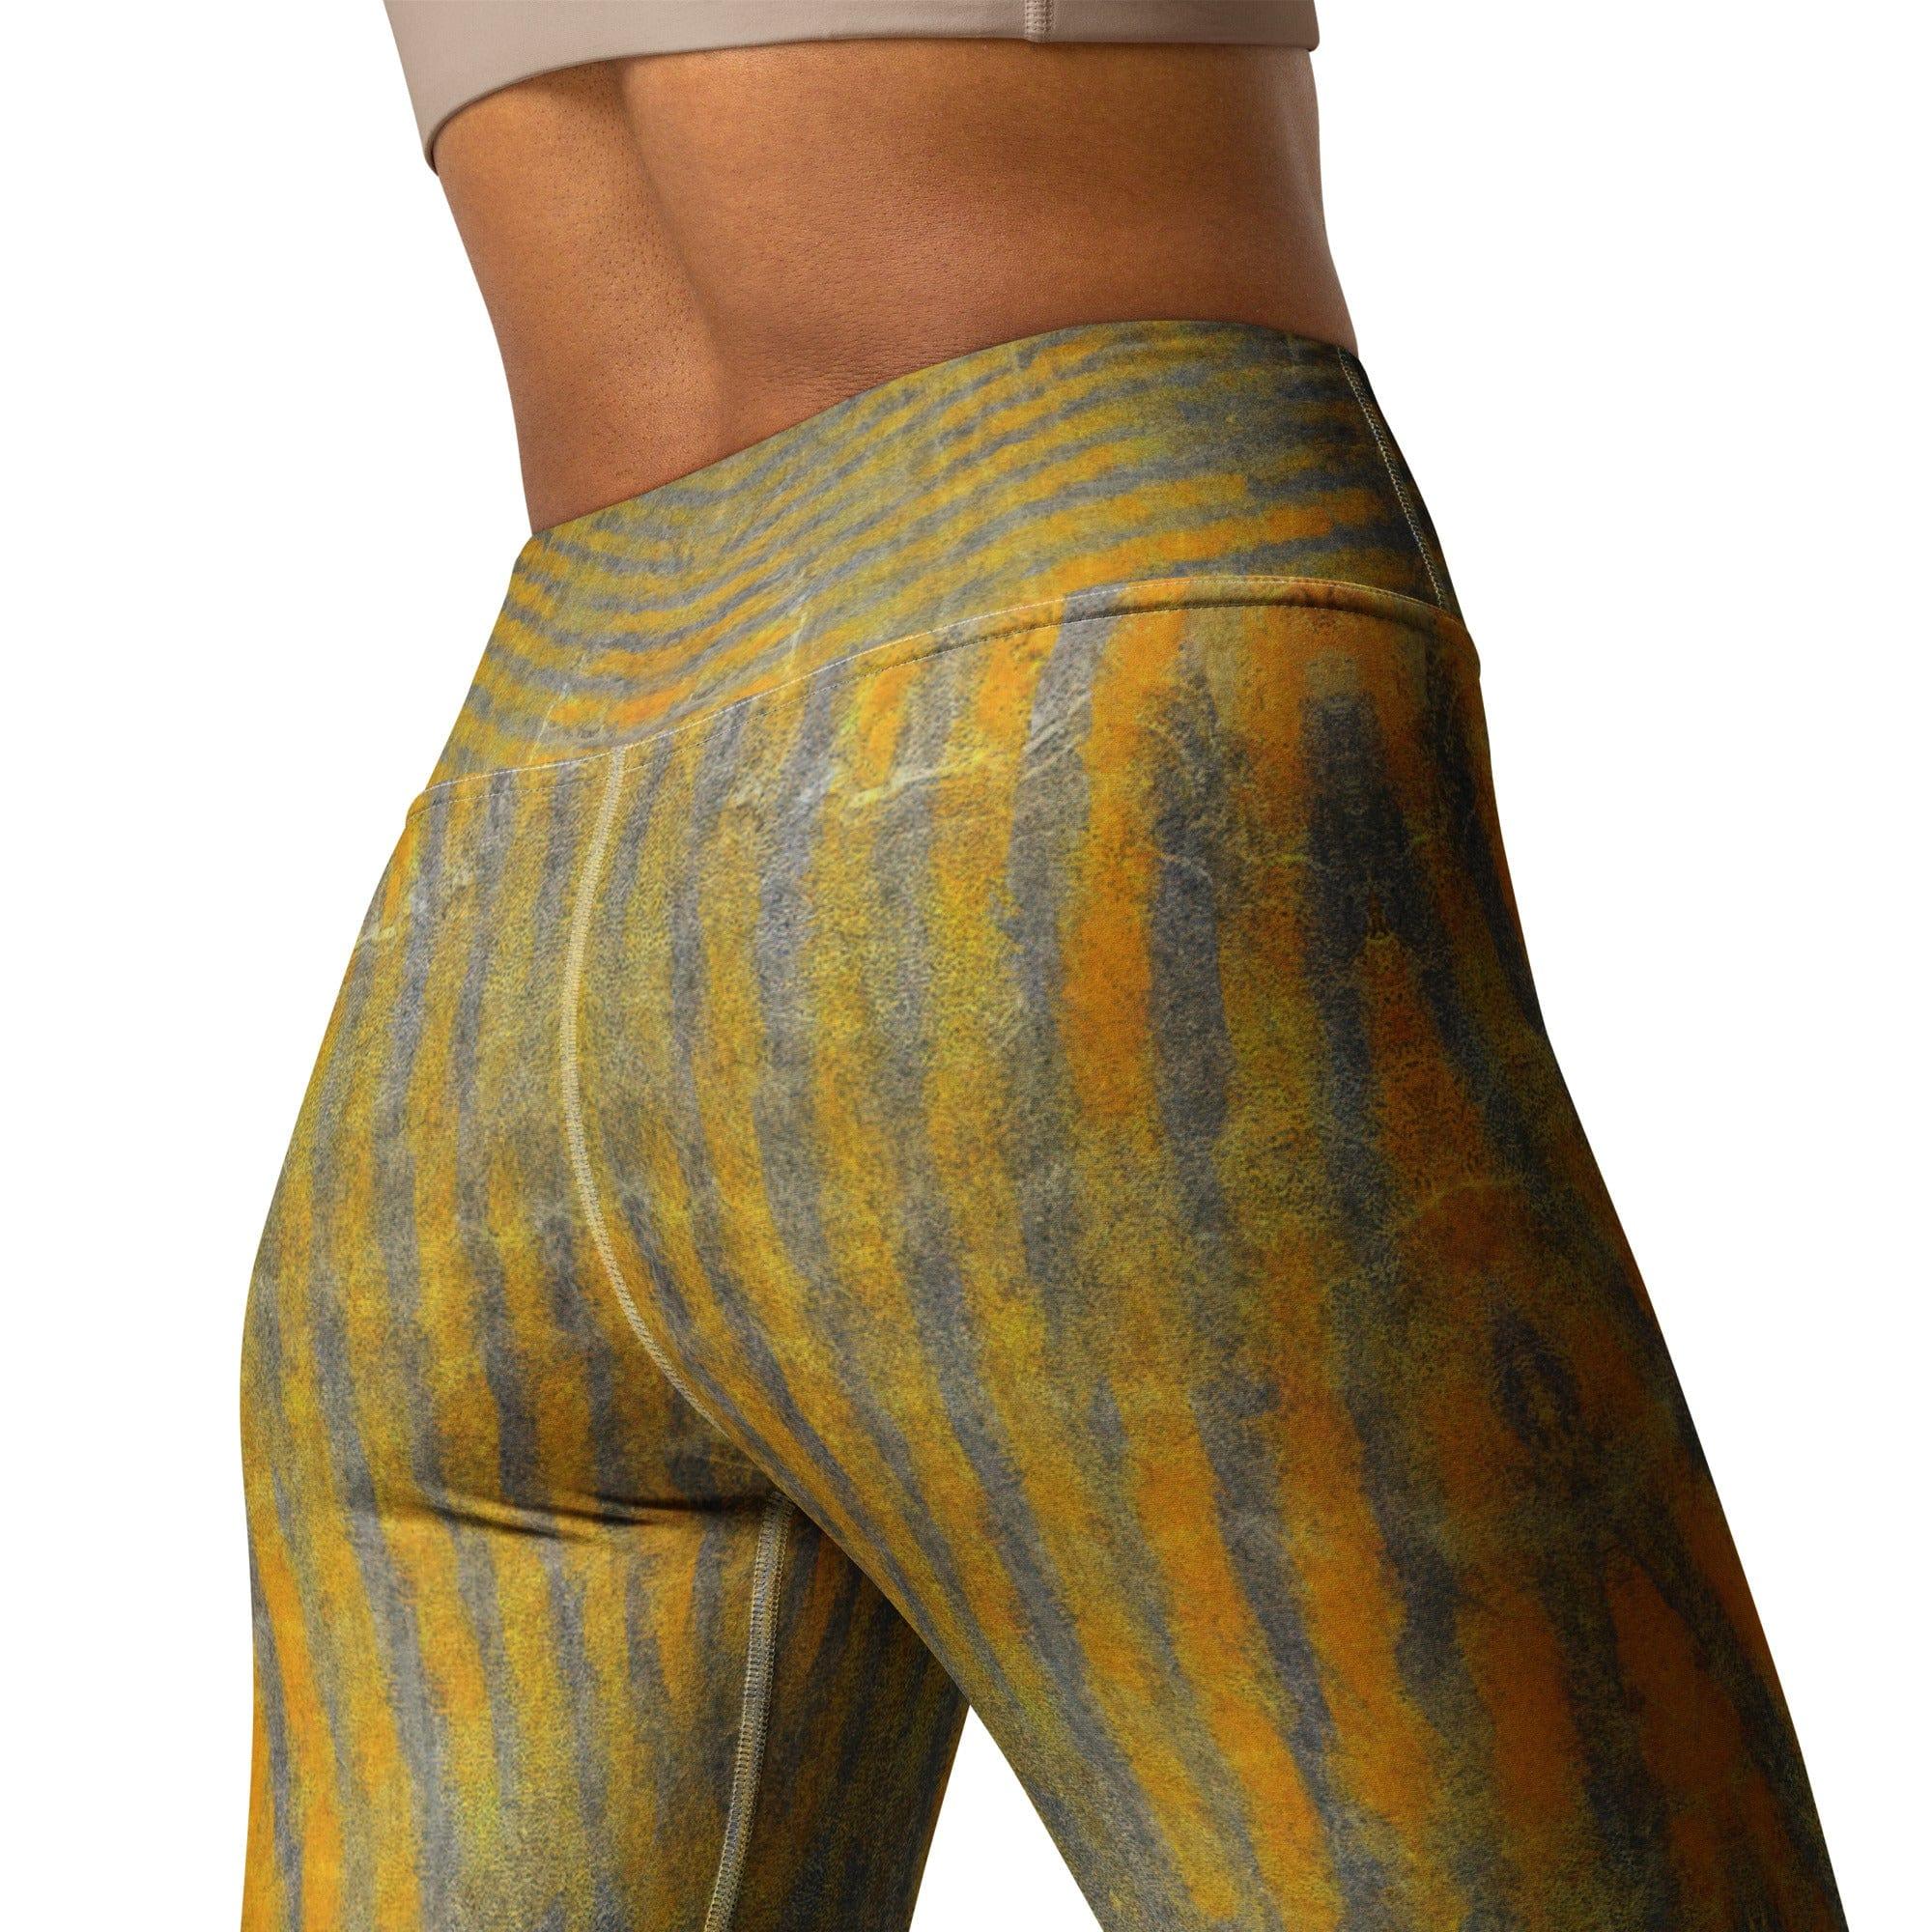 Soft and durable Yellow Yoga Leggings, perfect for all types of yoga